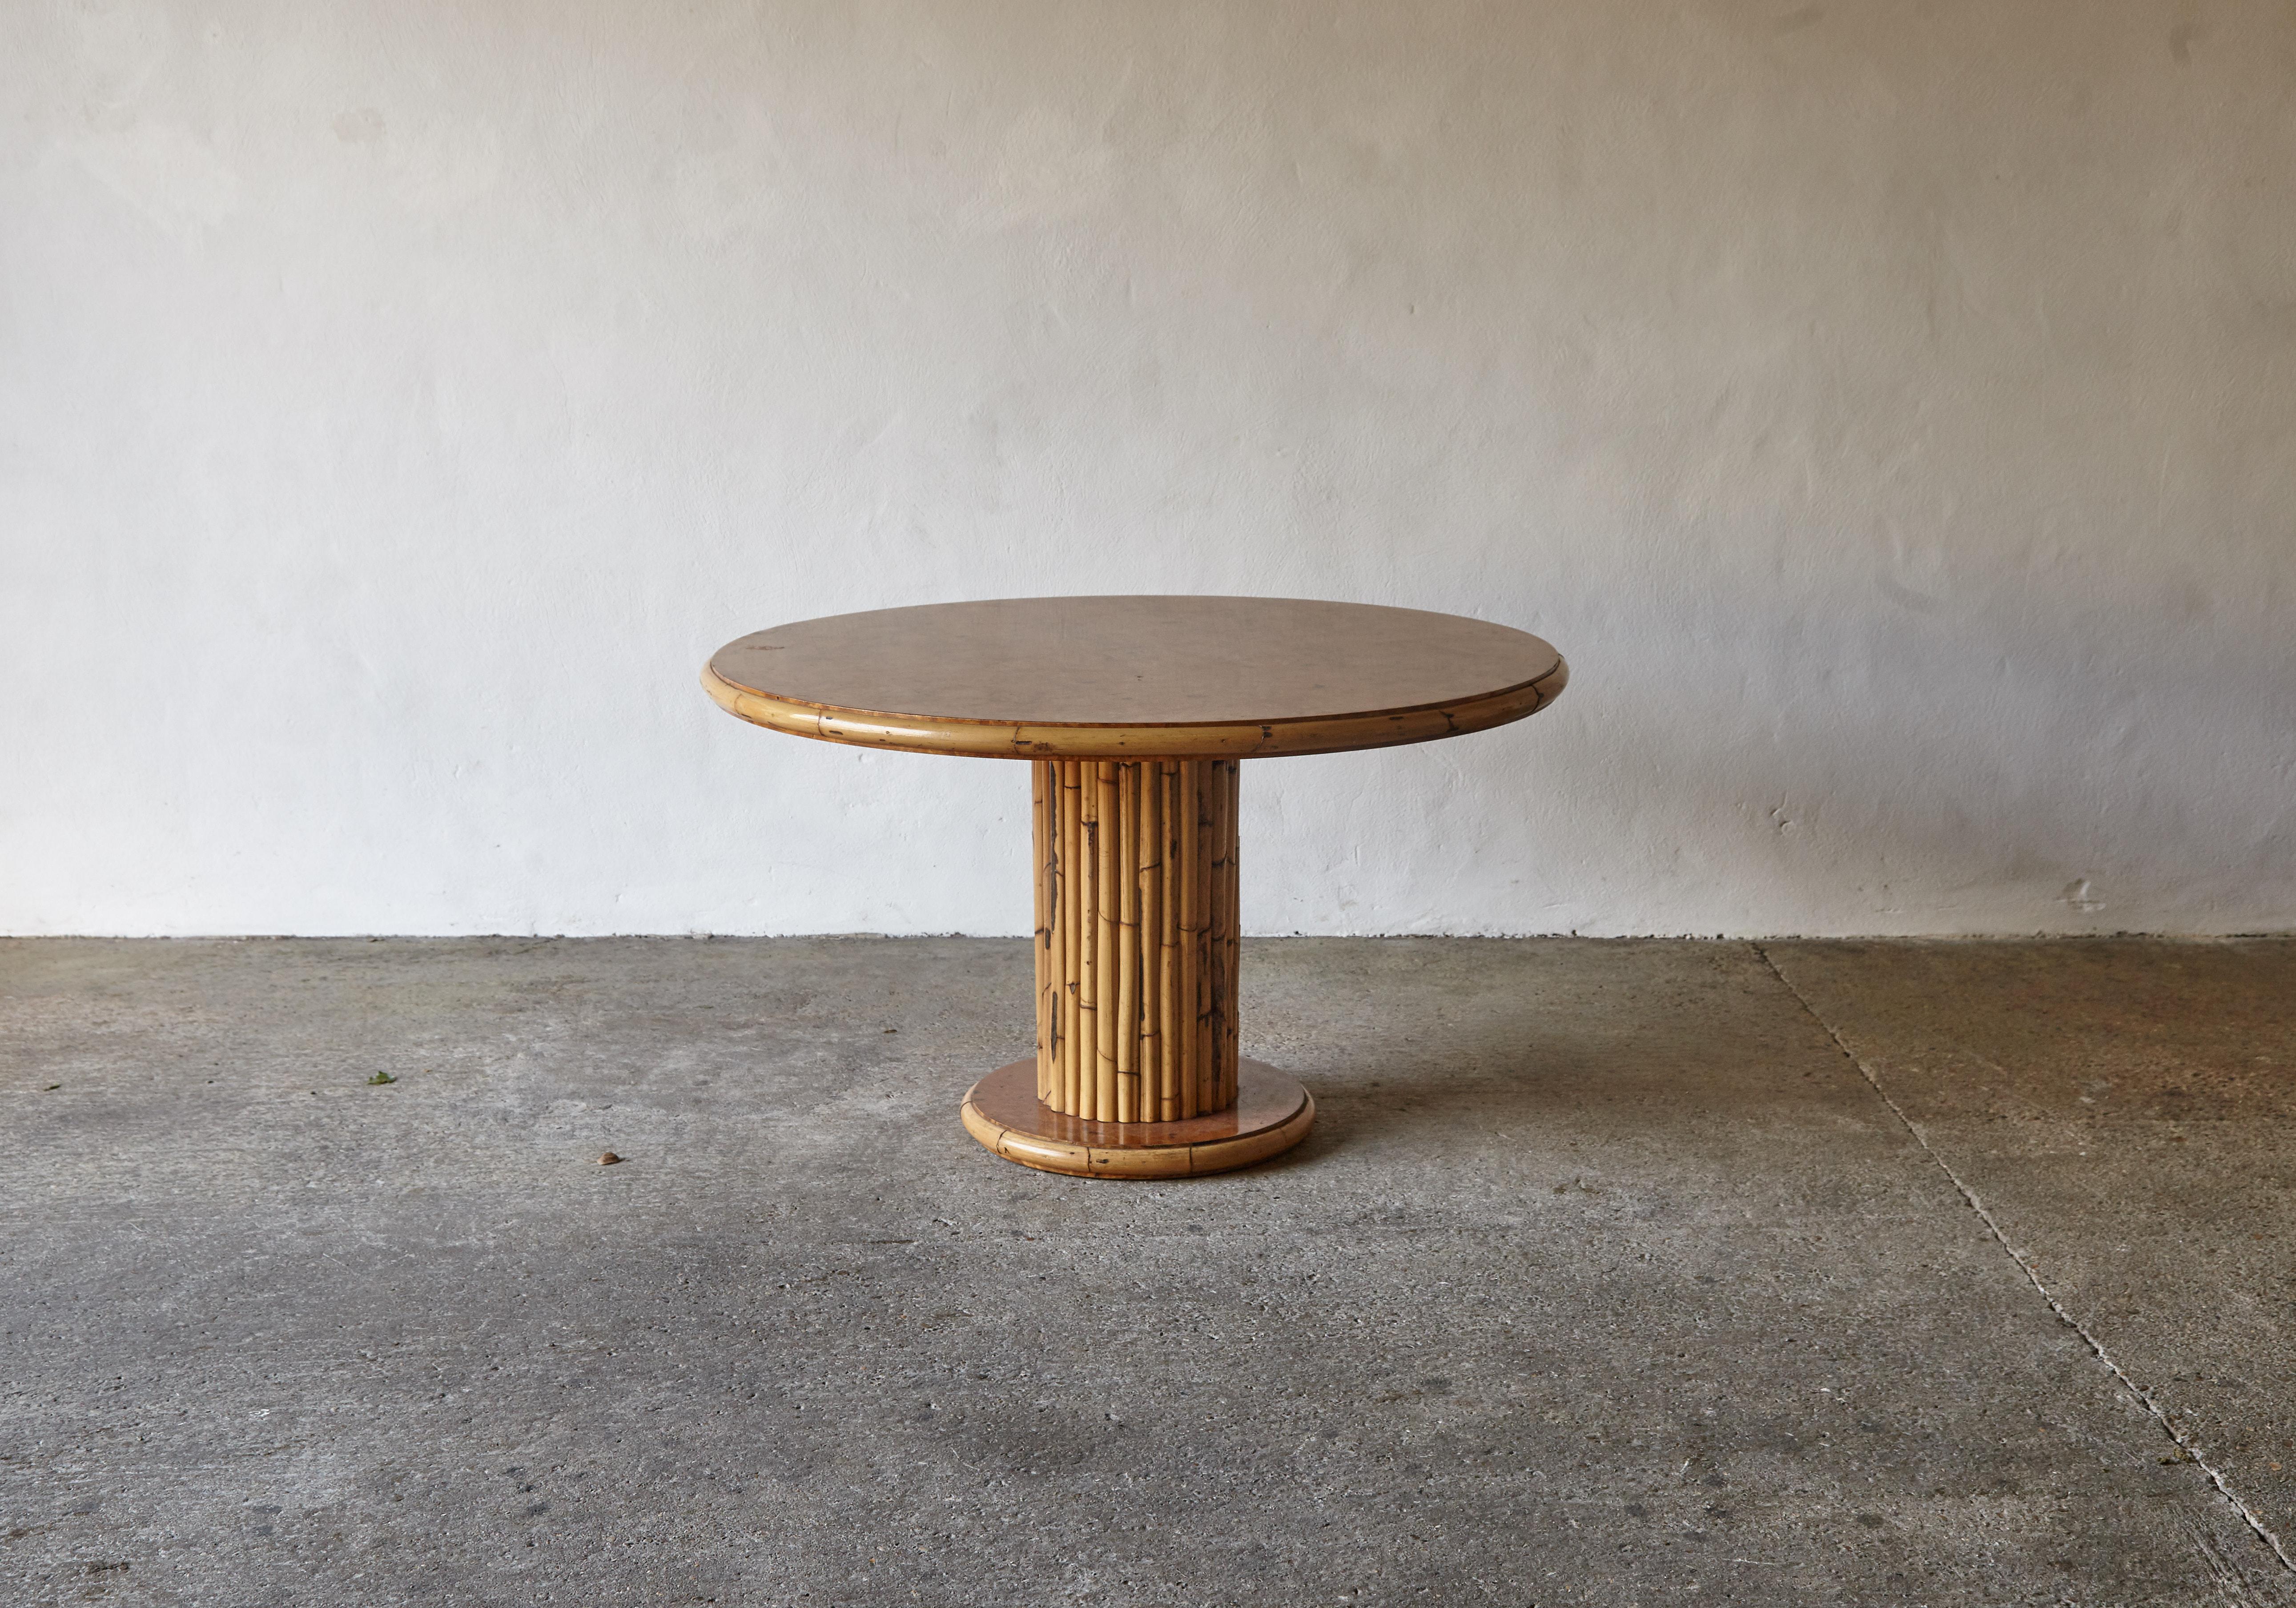 A round bamboo and burl wood dining table, Italy, 1970s, in the style of Gabriella Crespi. In very good ready to use condition.





Please note: Prices do not include VAT. VAT may be applied depending on the ship-to location.